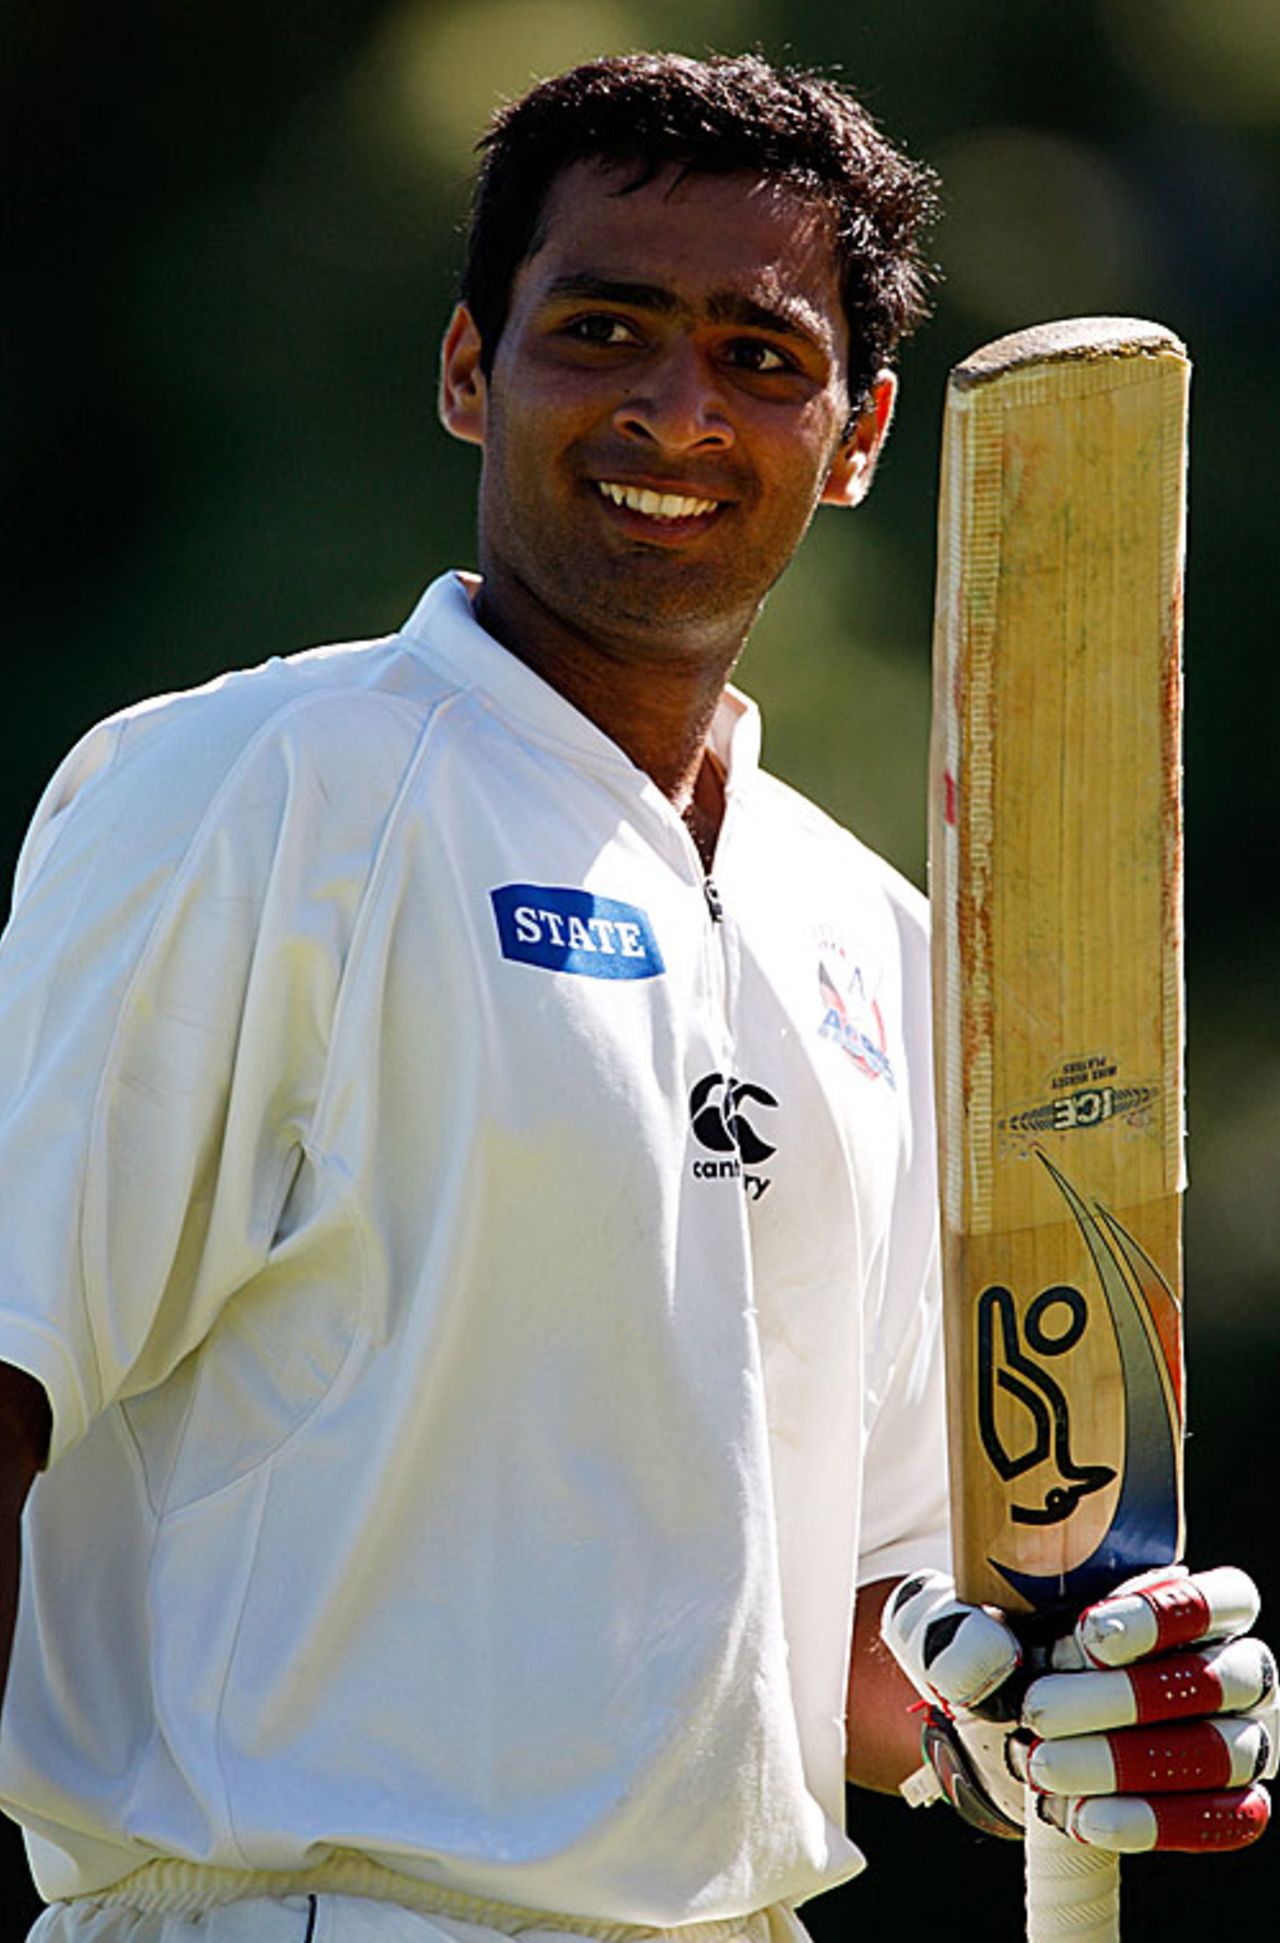 Jeet Raval scored a mammoth 256 for Auckland, Auckland v Central Districts, State Championship, Eden Park Outer Oval, 2nd day, March 30, 2009